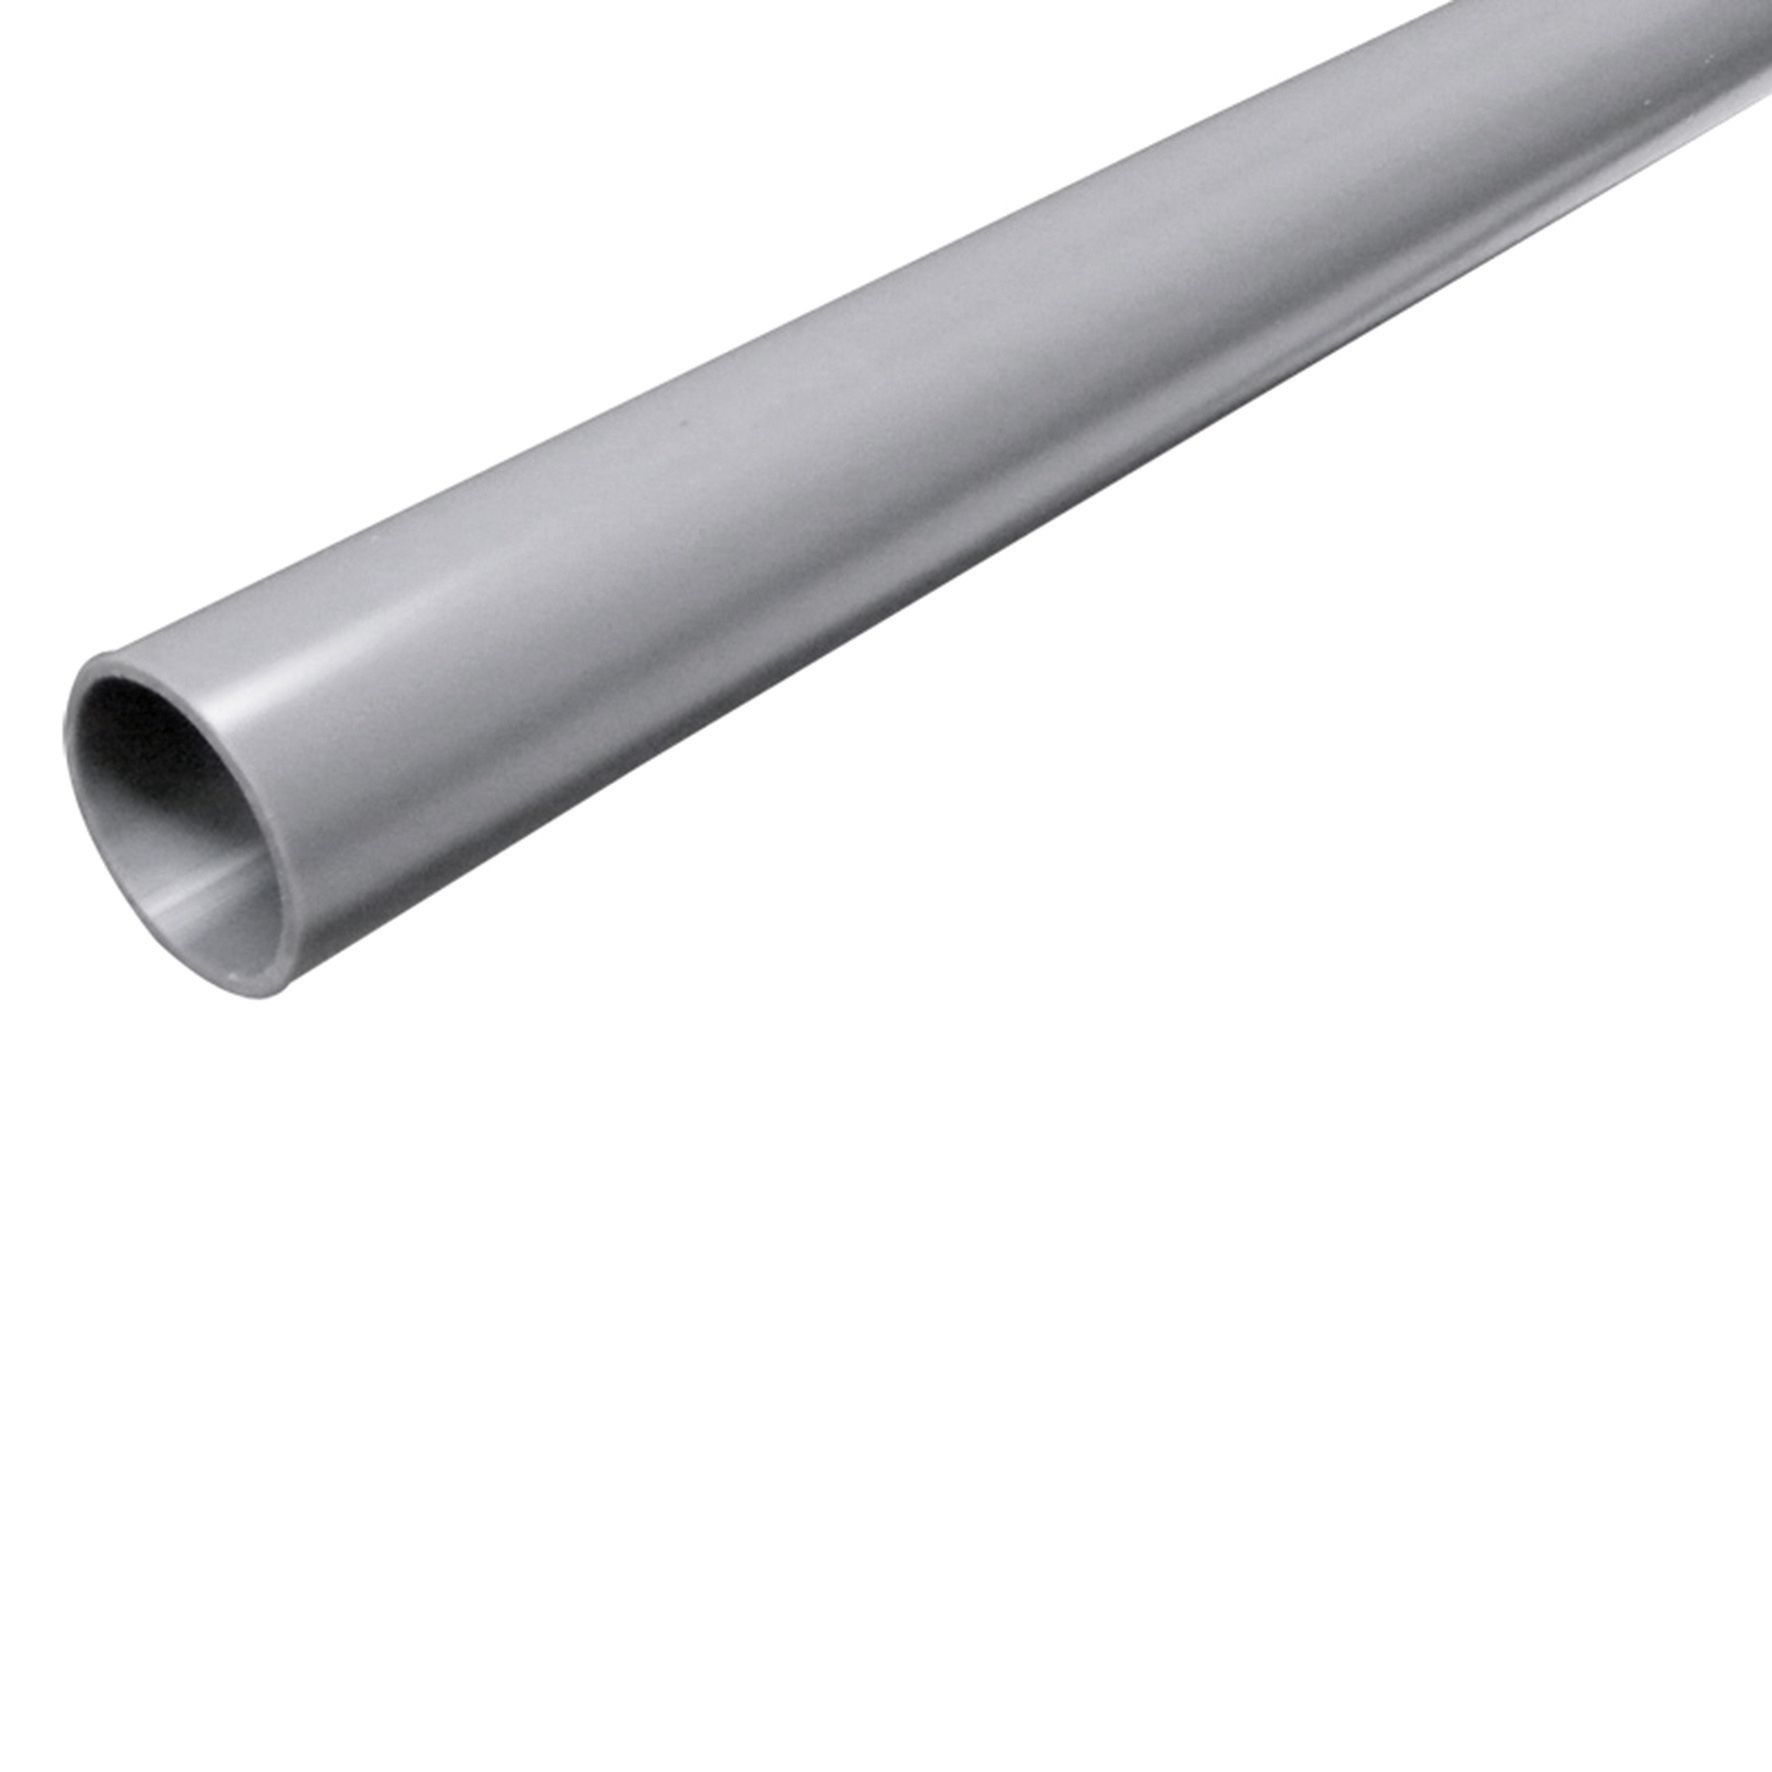 Image of FloPlast Solvent Weld Waste Pipe - Grey 32mm x 3m